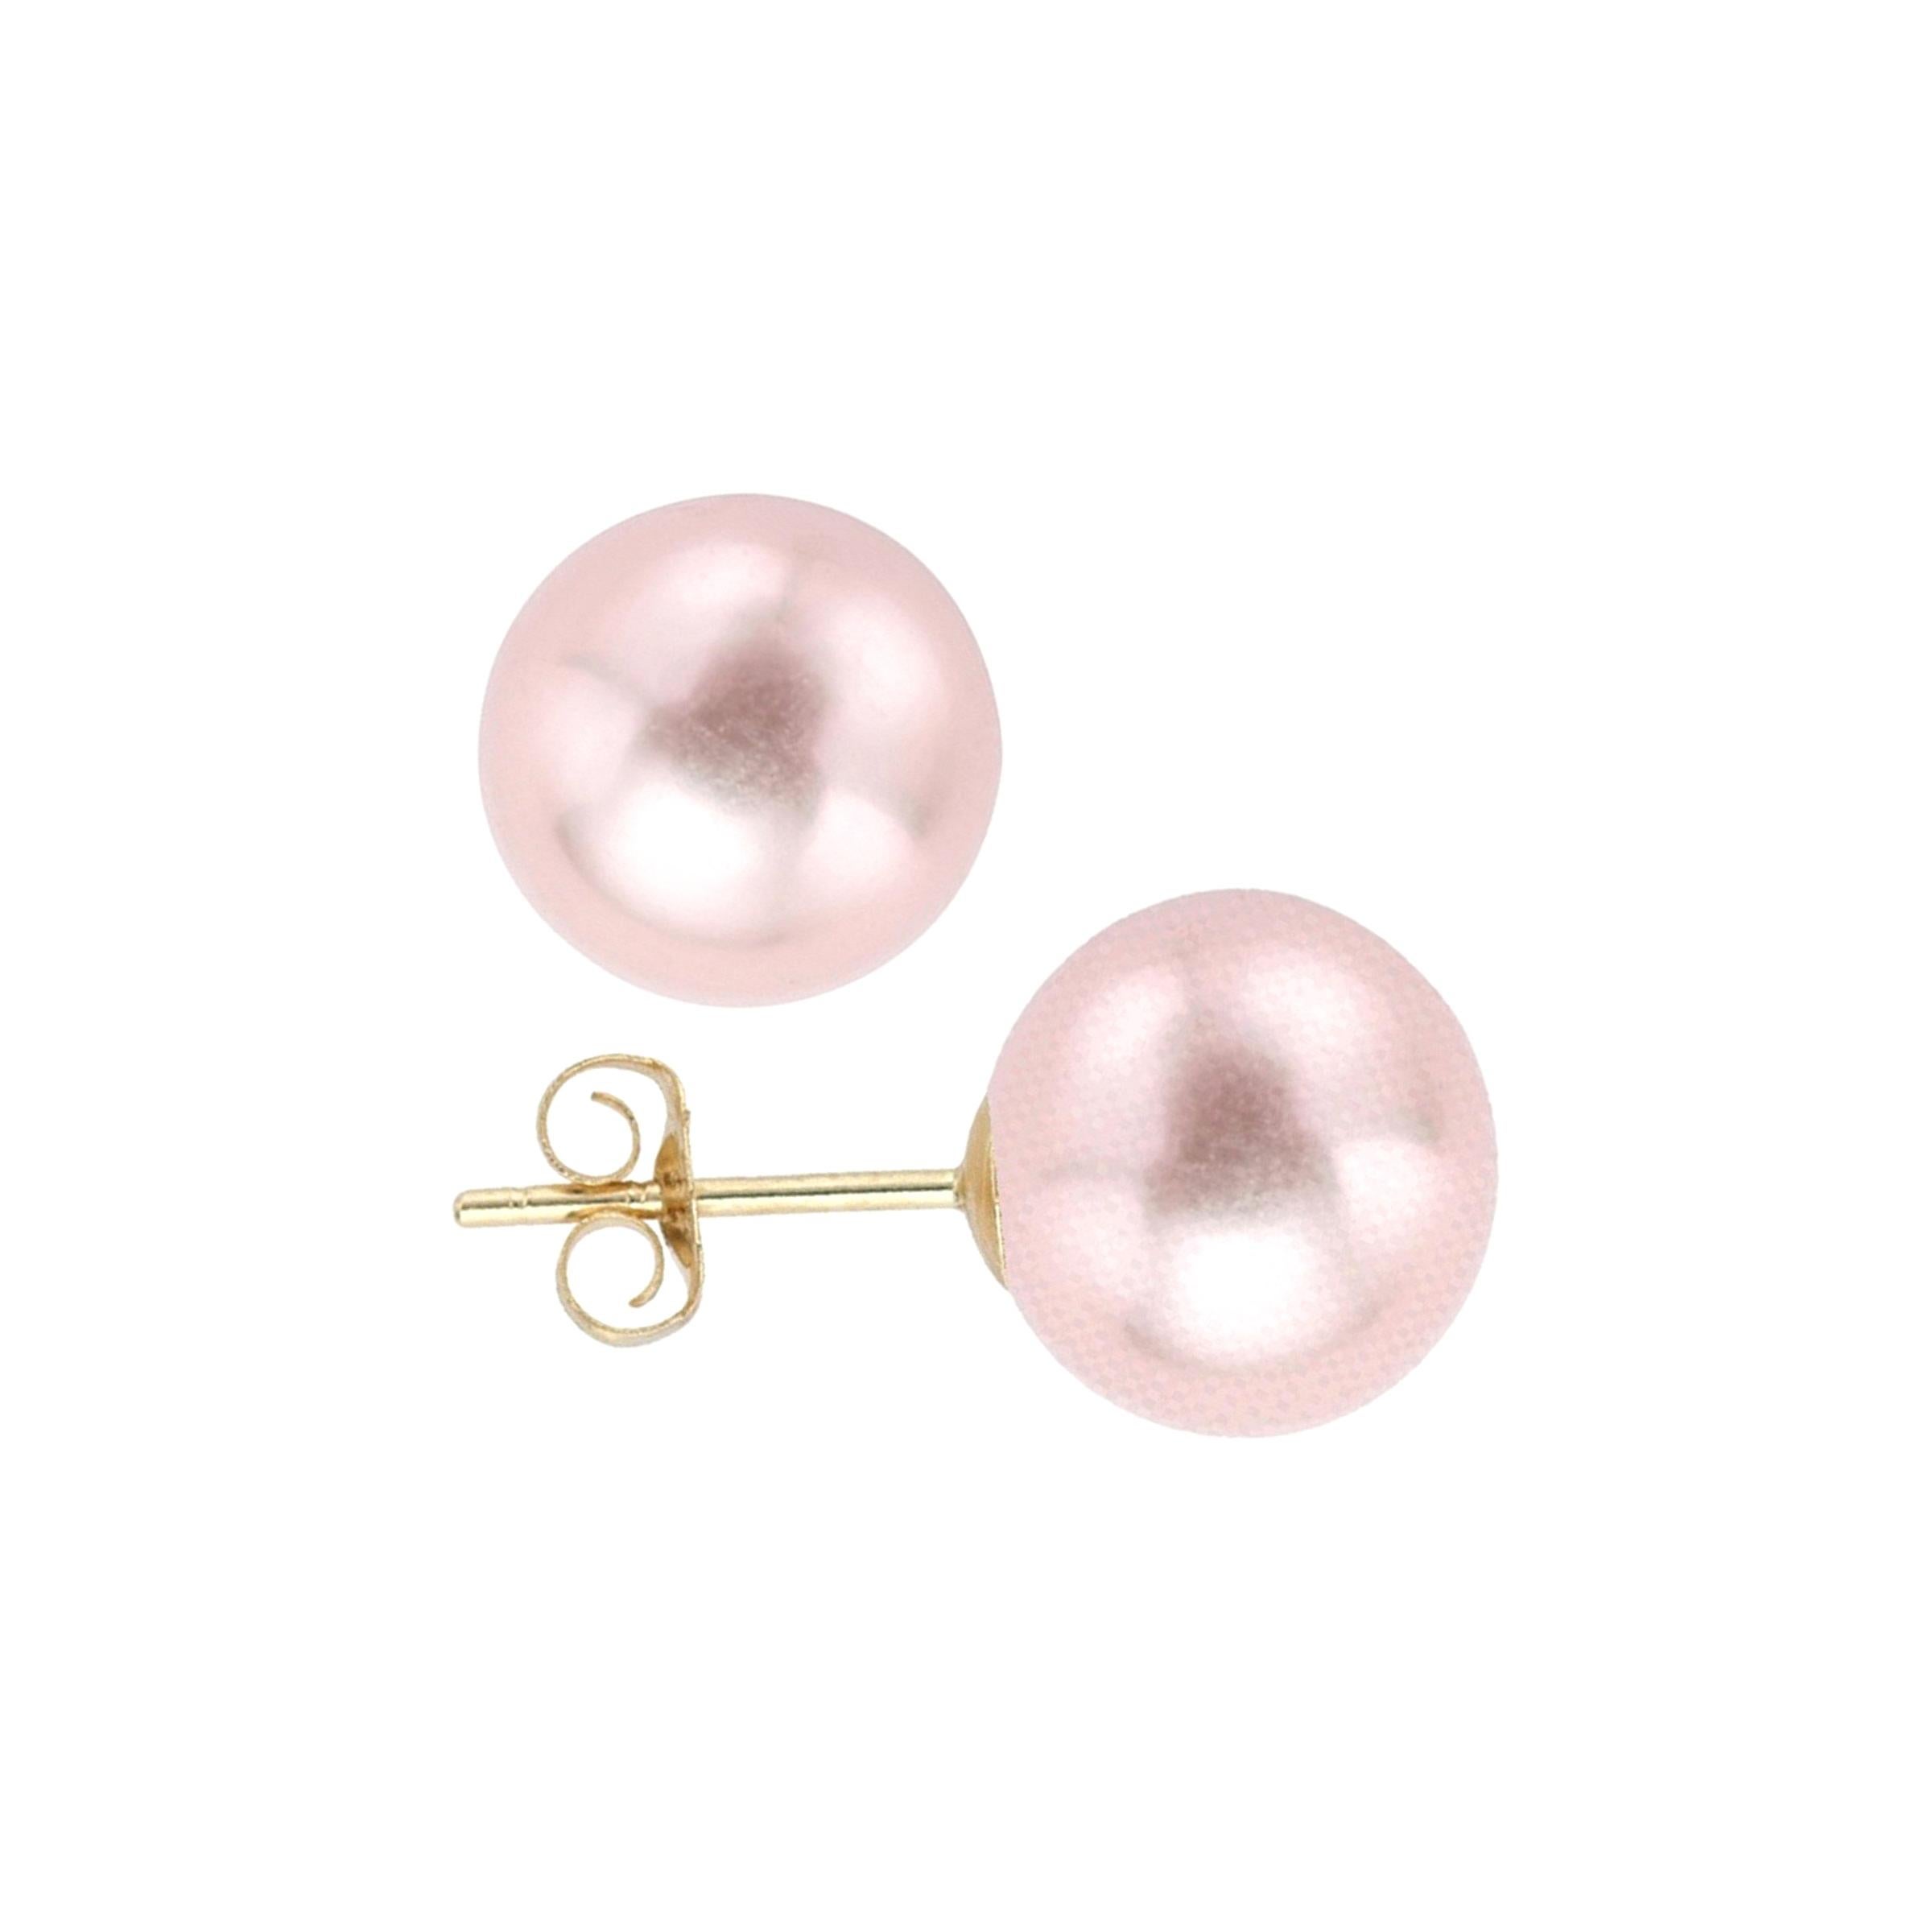 AAA Quality Pink Freshwater Cultured Pearl Earring Stud on 14 Karat Yellow Gold For Sale